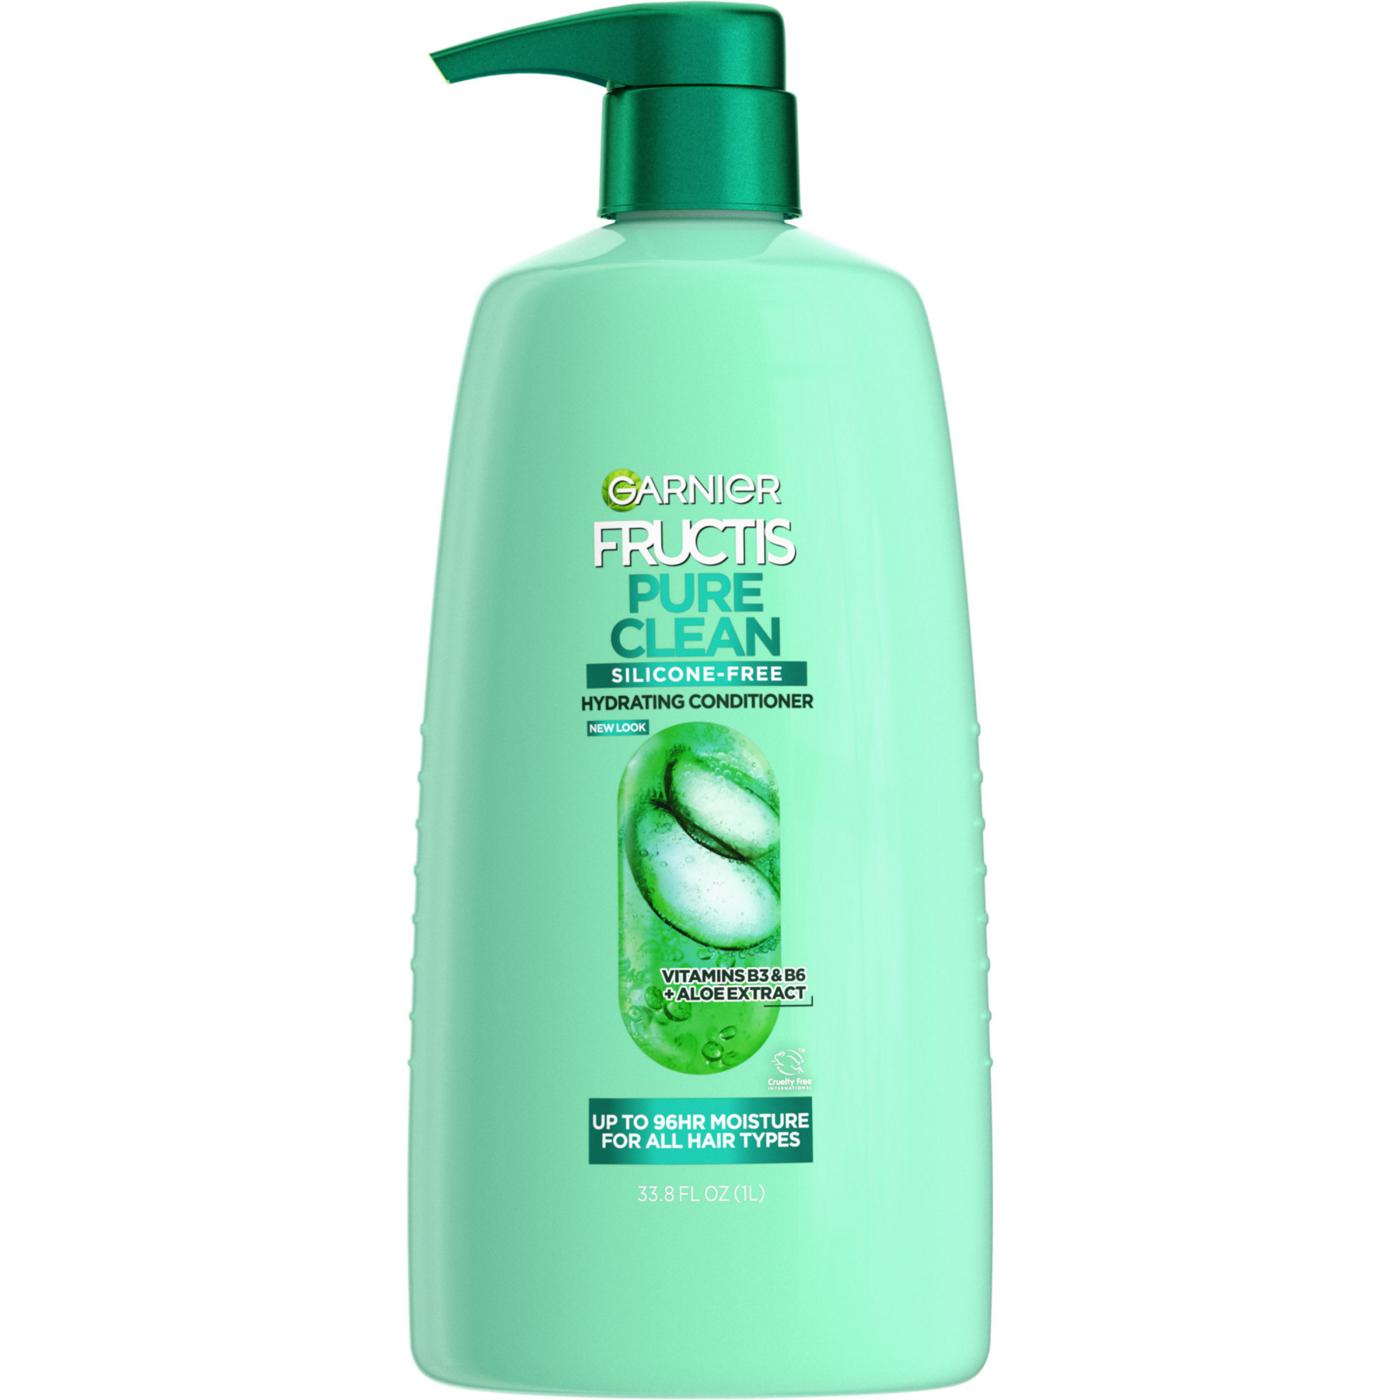 Garnier Fructis Pure Clean Hydrating Conditioner; image 1 of 7